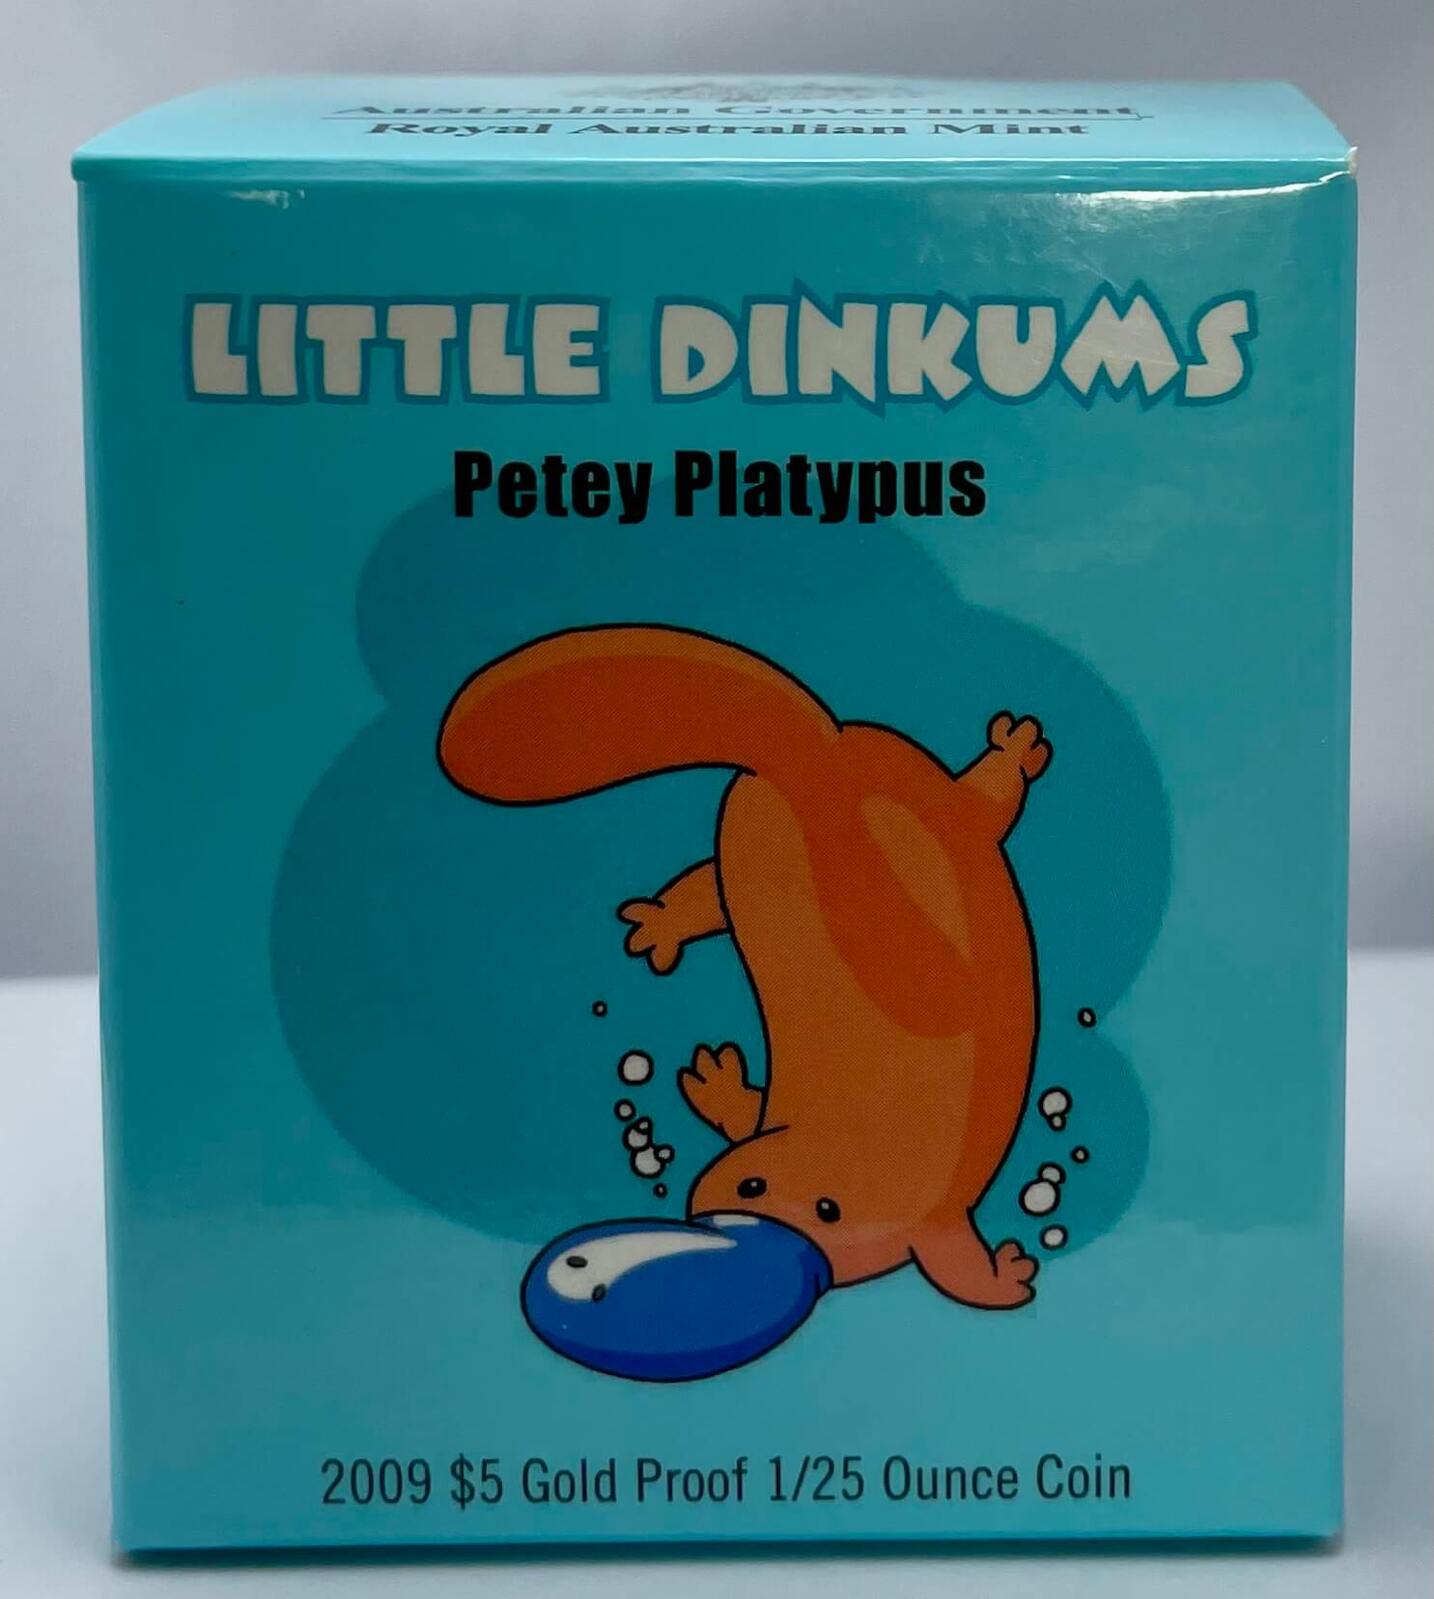 2009 Gold $5 Proof Little Dinkums - Petey Platypus product image